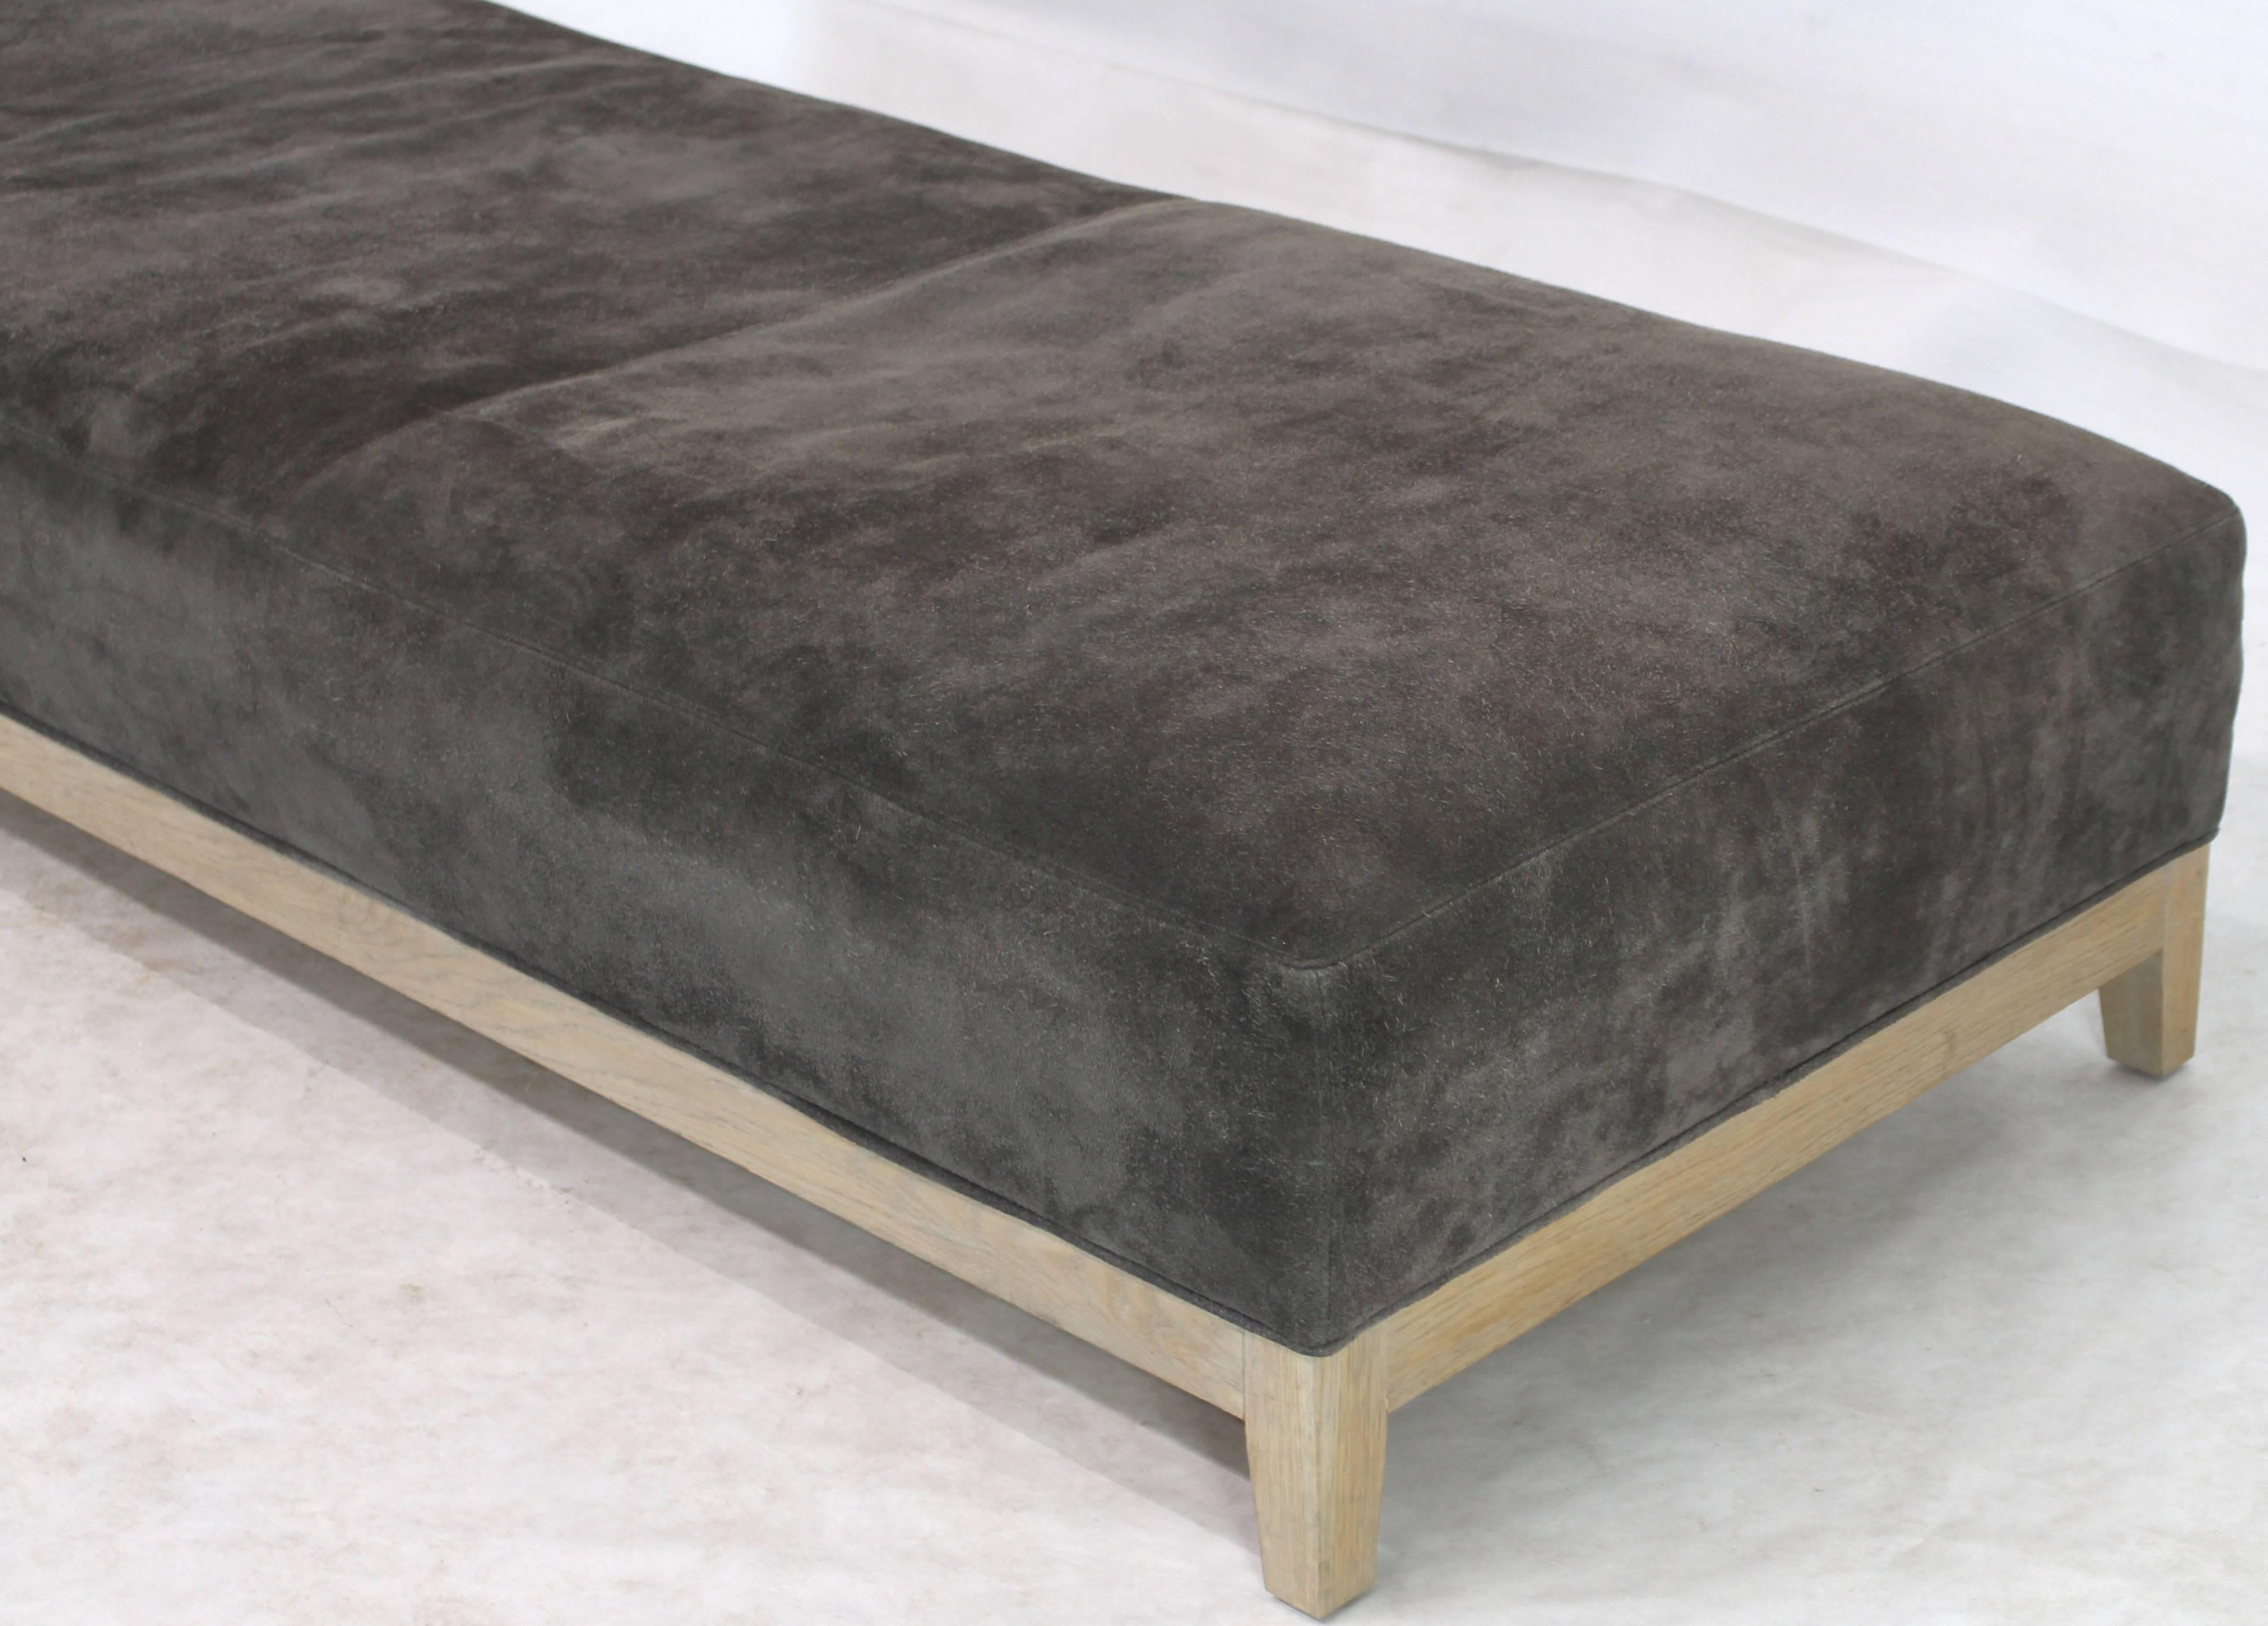 American Grey Suede Leather Limed Oak Frame Daybed